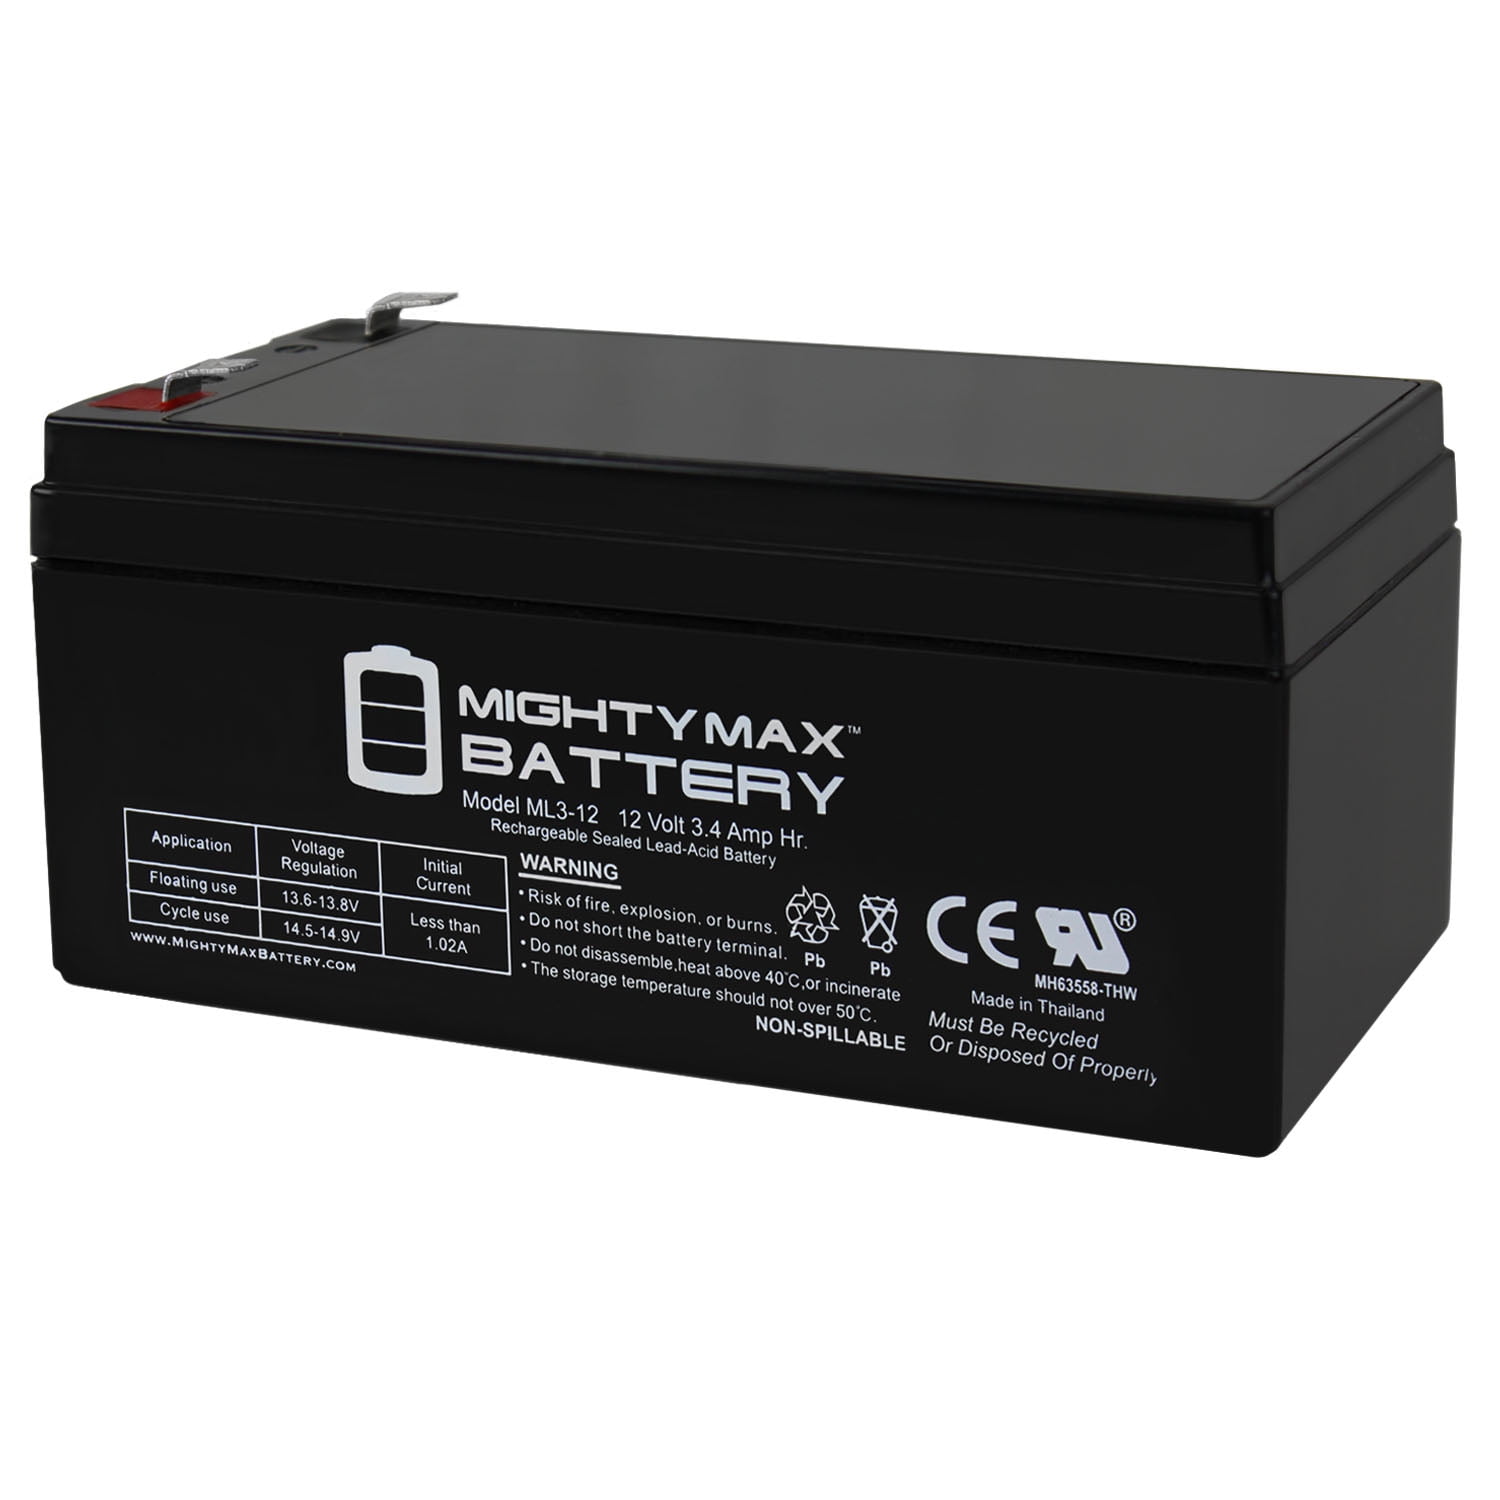 Mighty Max 12V 7.2AH Battery Boss Buck 600LB Automatic Feeder 12V 1Amp Charger 